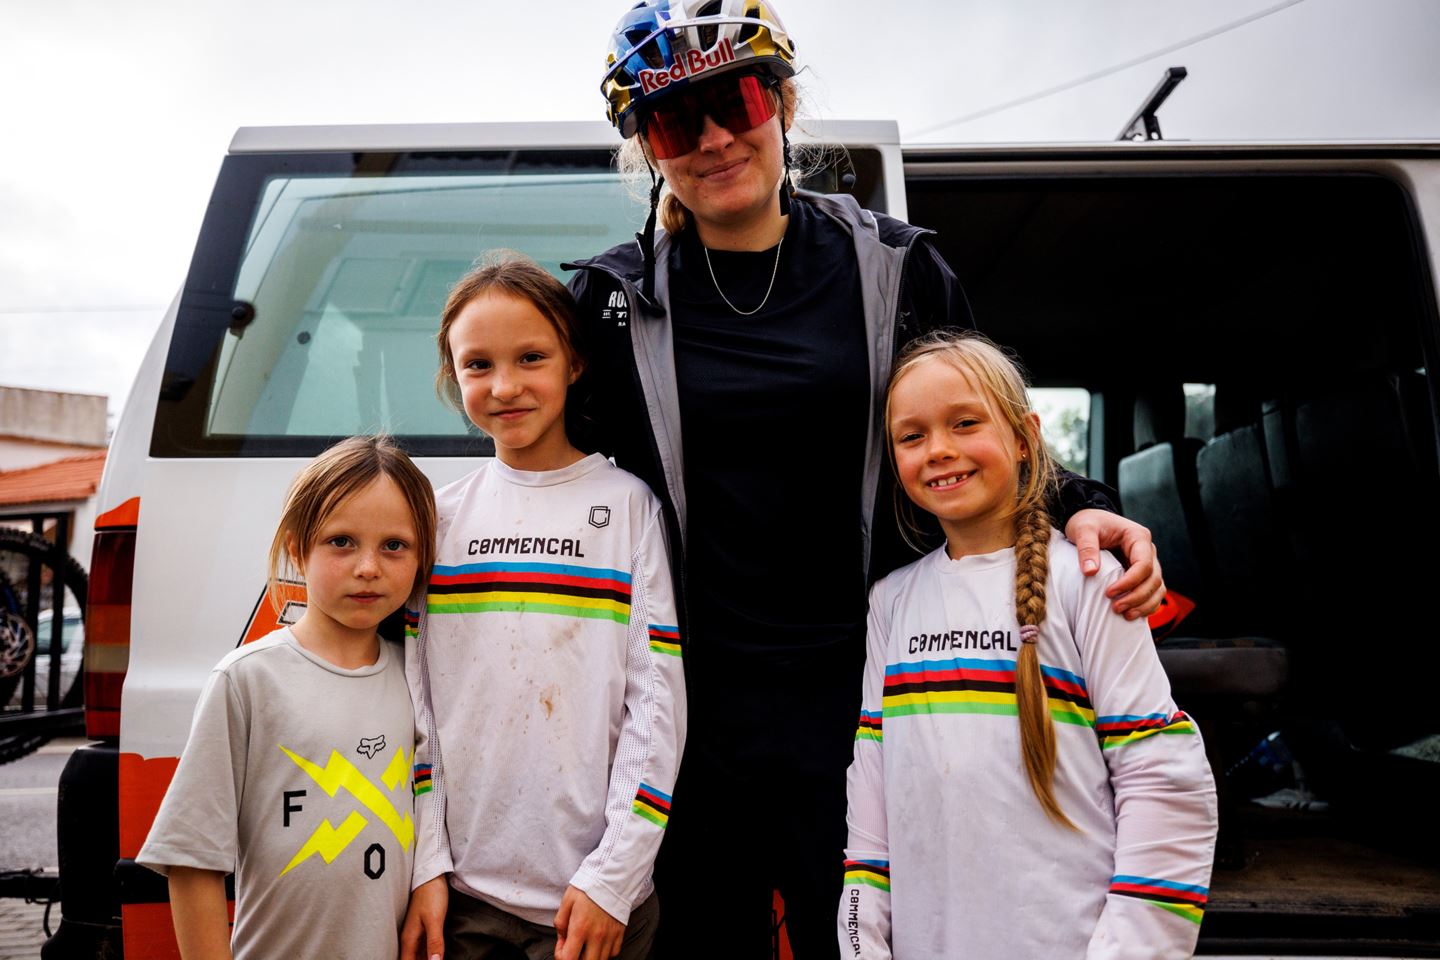 Vali Höll standing with a few young girls.